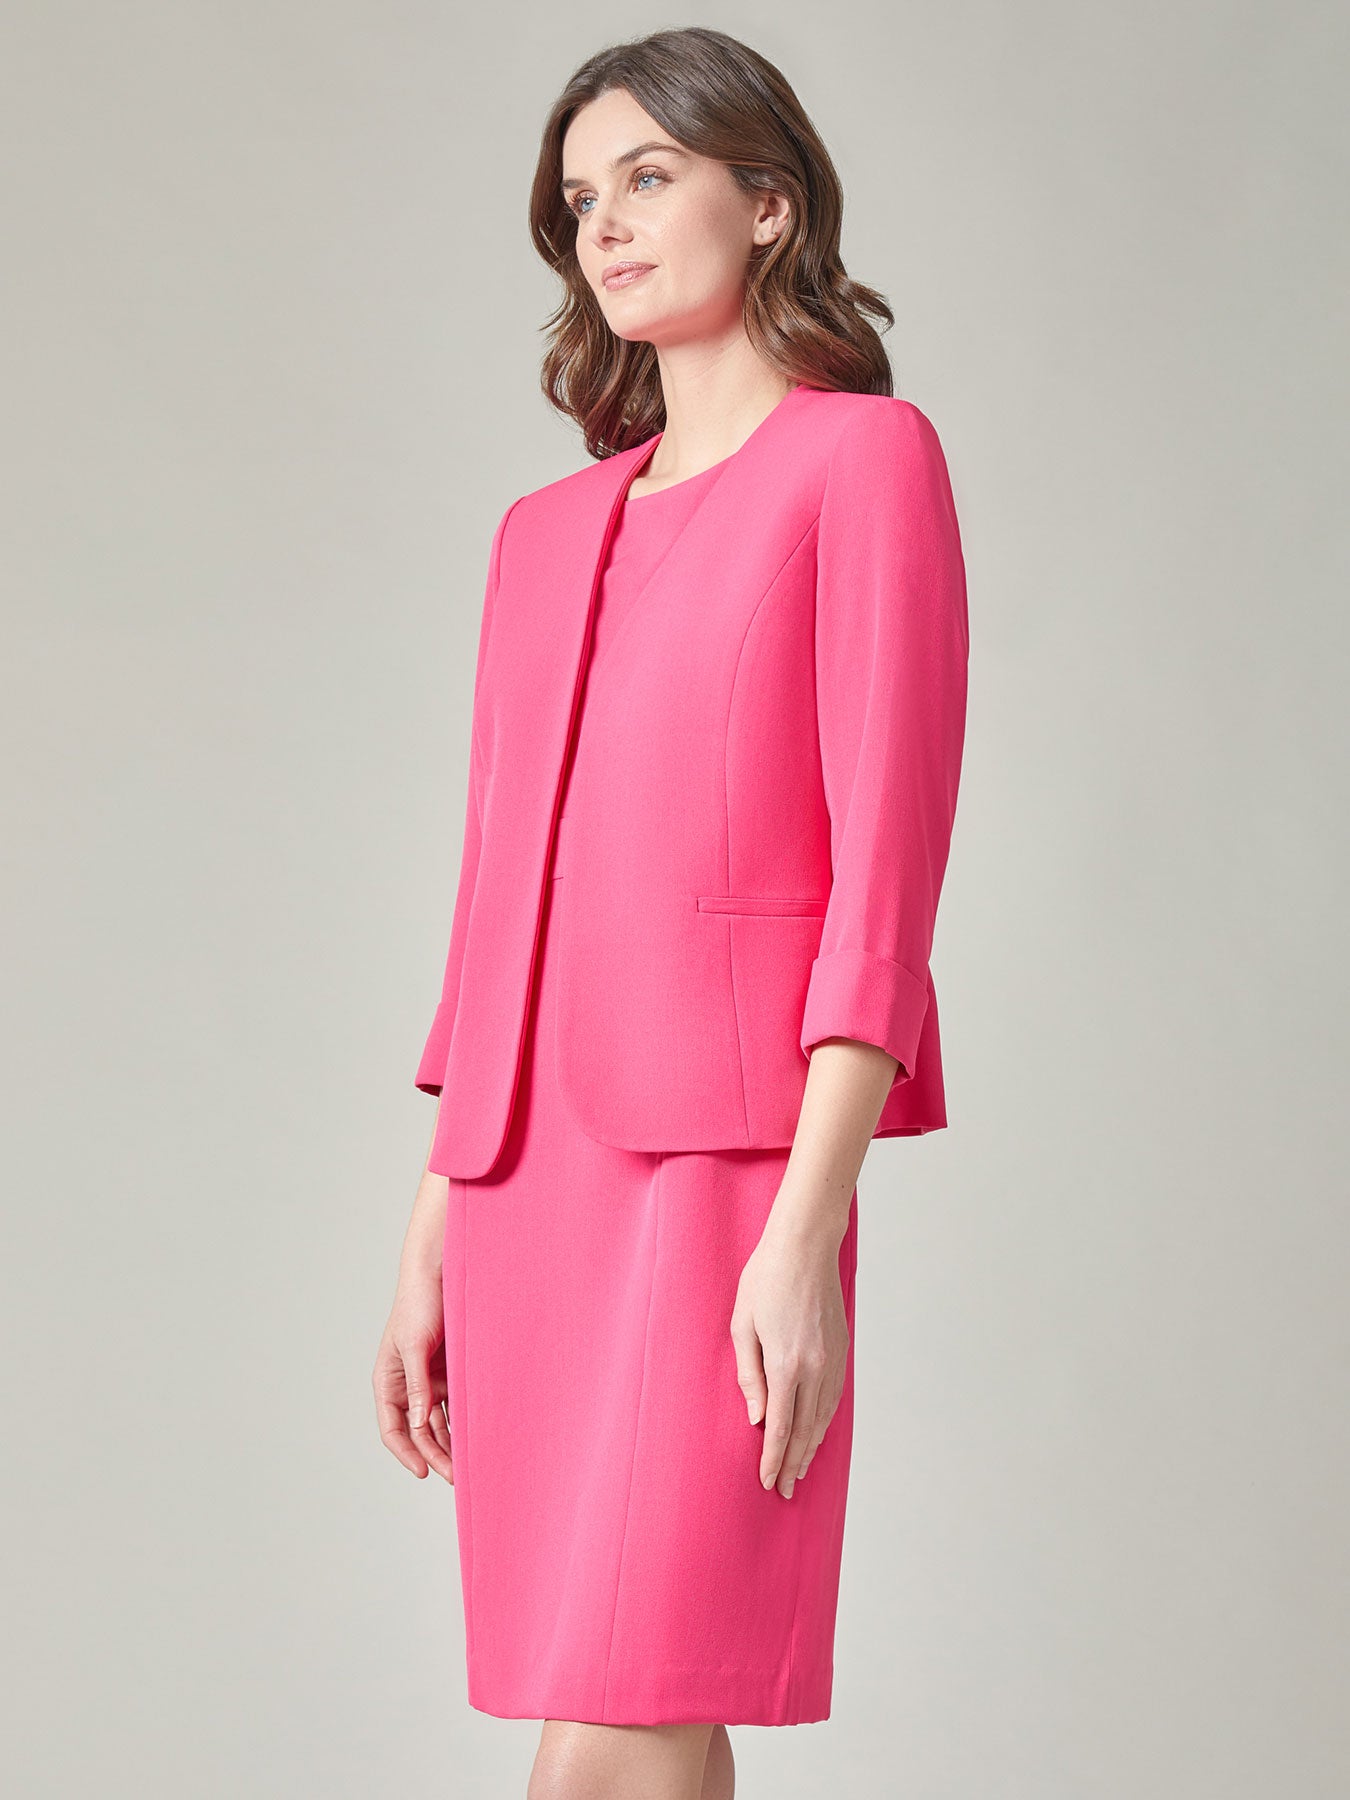 Kasper Plus Size Pretty in Pink Suit Separates Collection